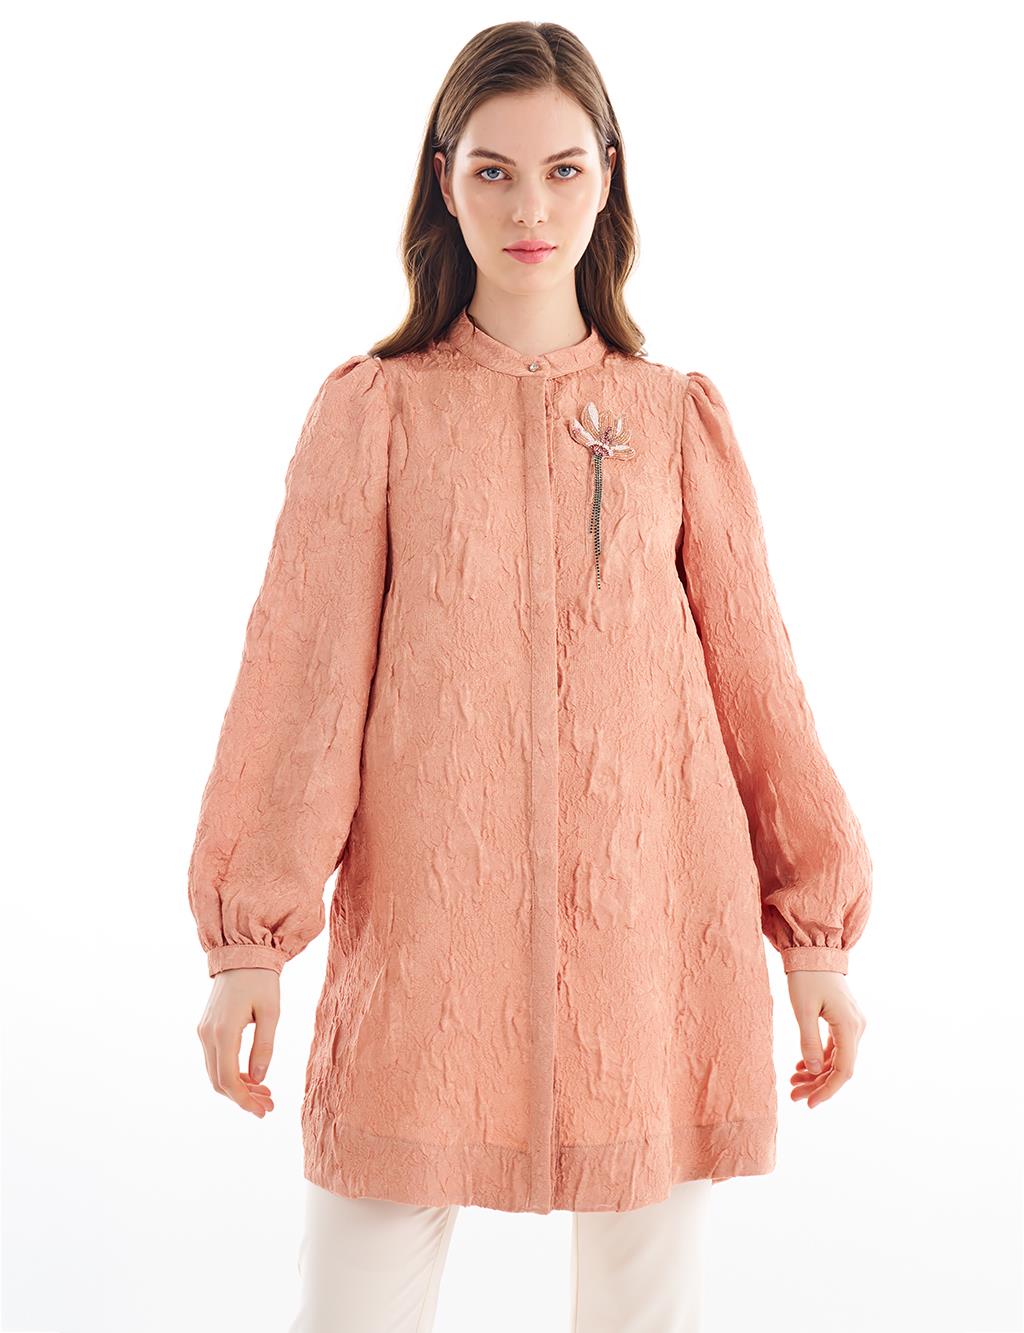 Relief Patterned Crew Neck Tunic Mushroom